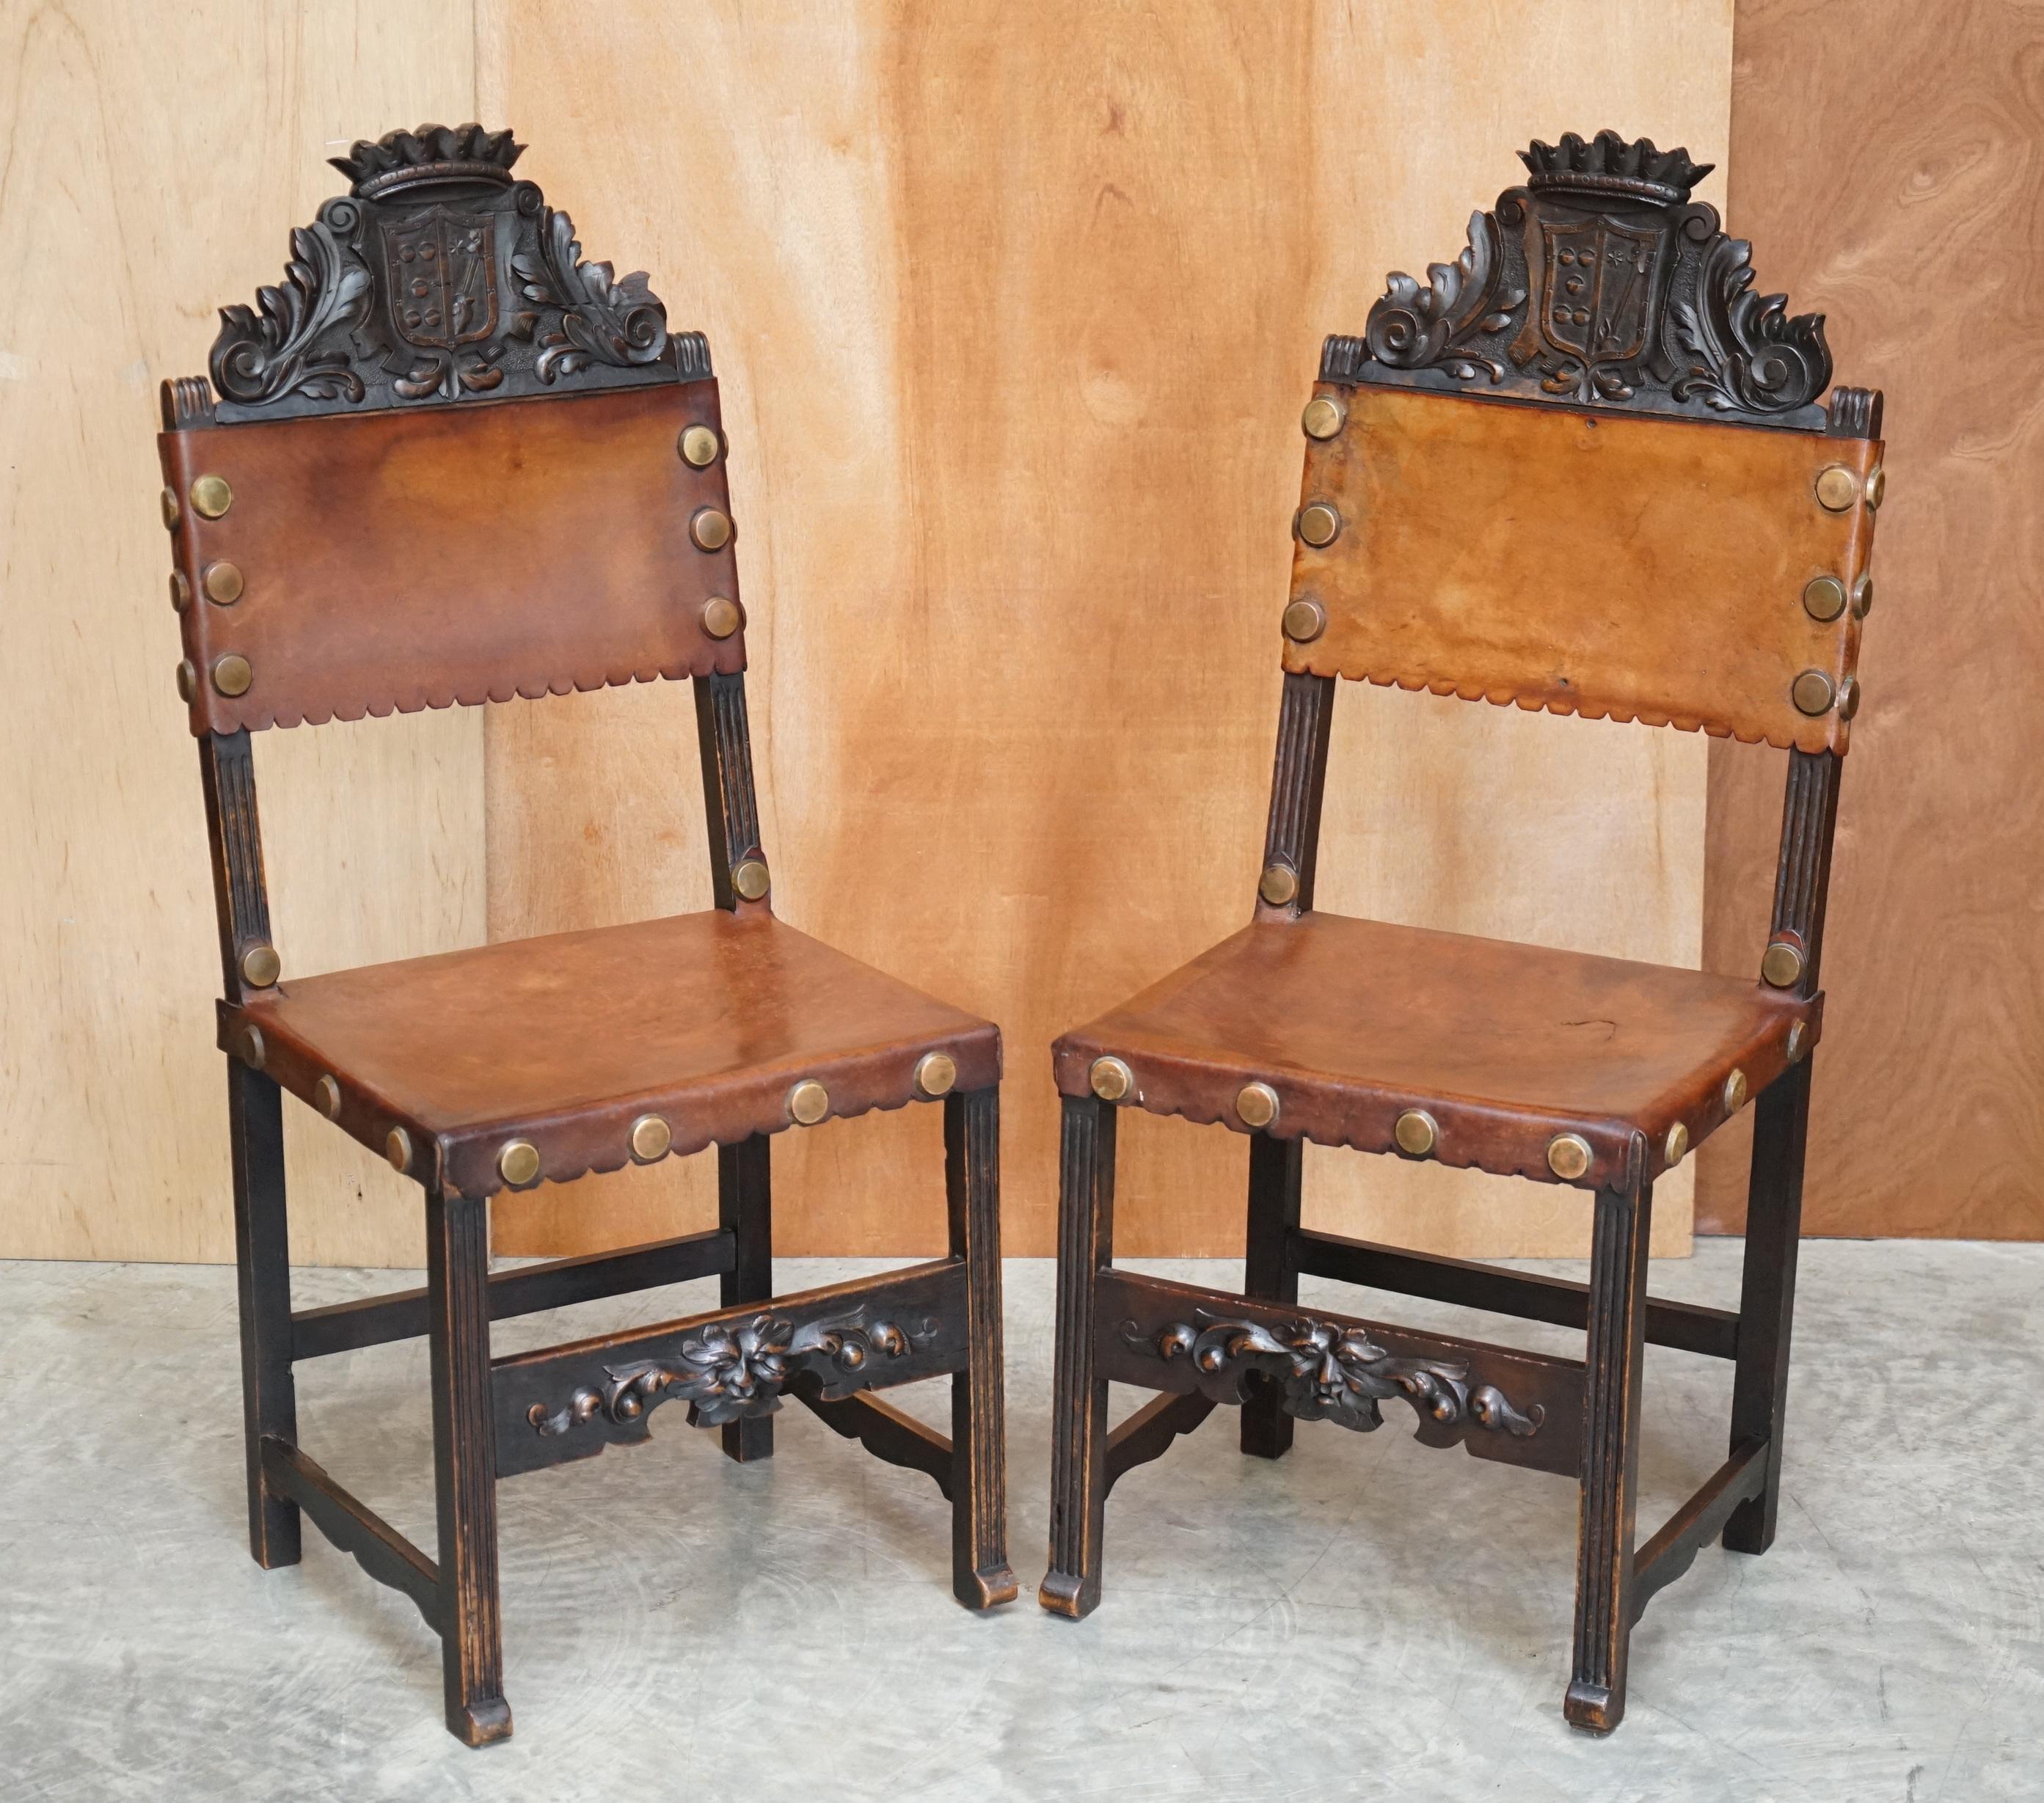 We are delighted to offer for sale this lovely circa 1880-1900 English hand carved oak with brown leather dining chairs that have coat of arms armorial crests to the top finished with crowns

I have never seen this exact chair before, the coat of